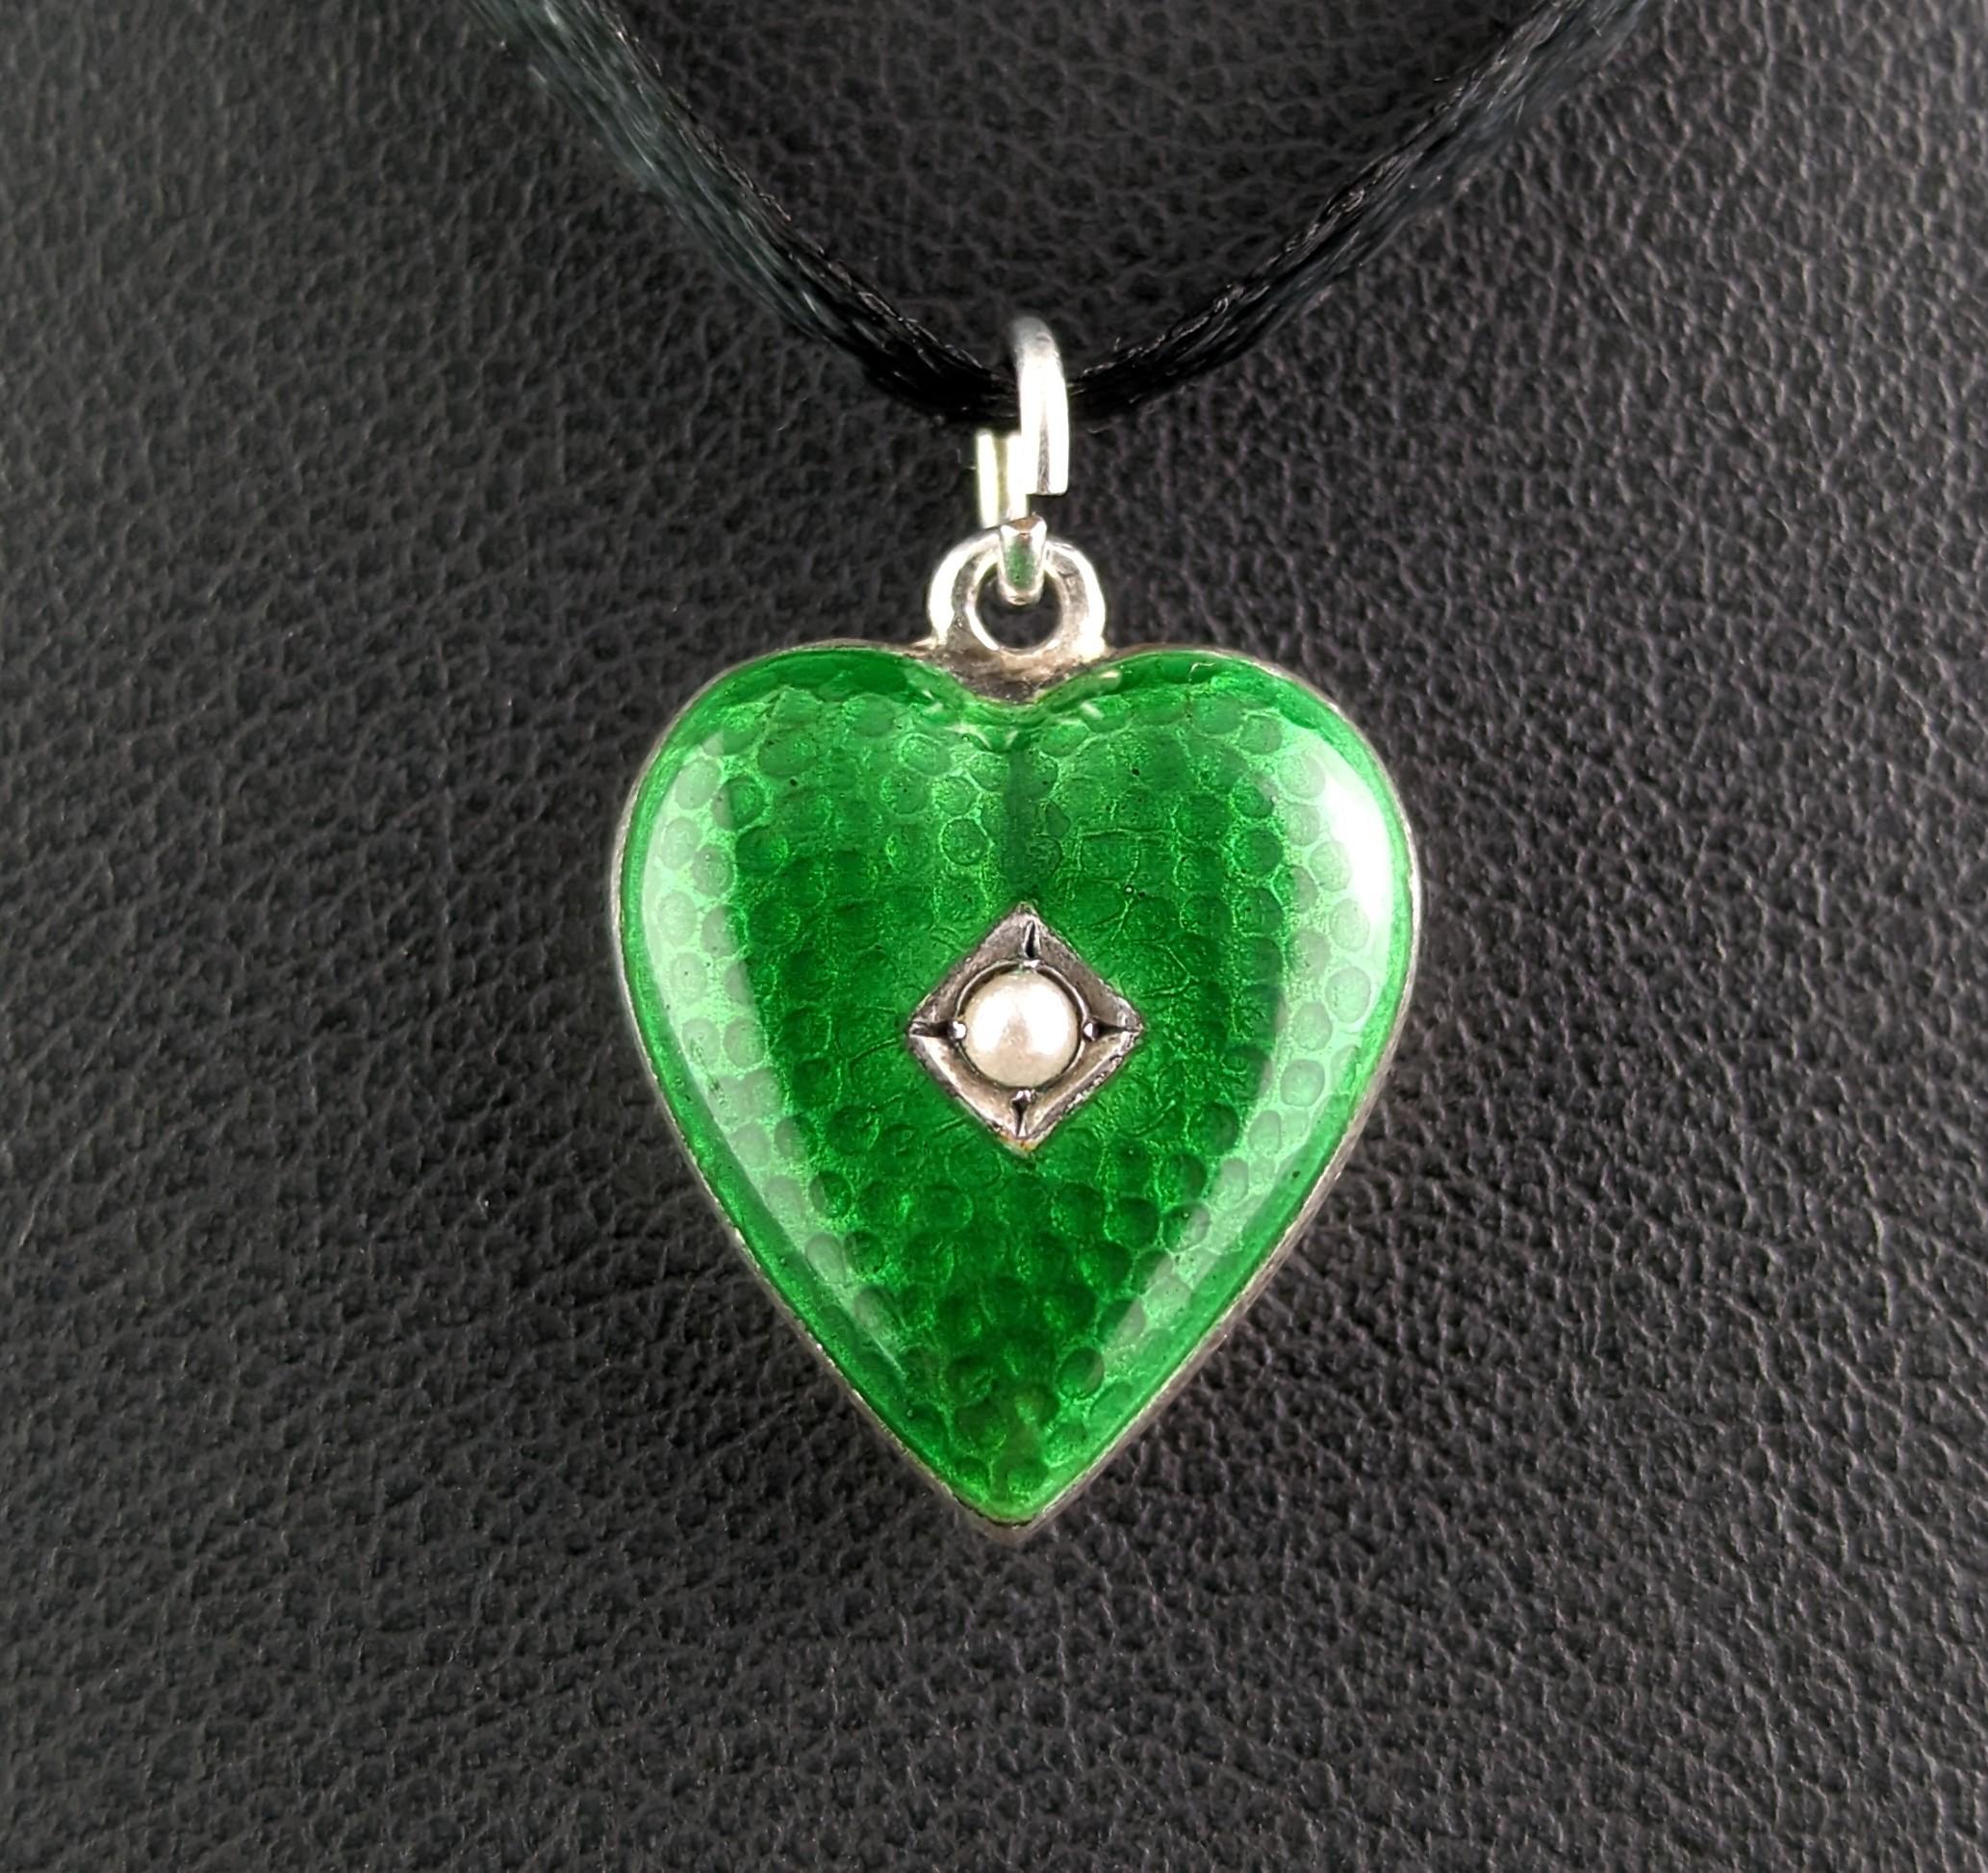 Isn't this just the sweetest ever little heart pendant!

Art Deco era, c1920s this dainty little heart pendant is made from sterling silver, the front decorated Ina rich emerald green enamel and set with a tiny seed pearl.

Such a well designed and